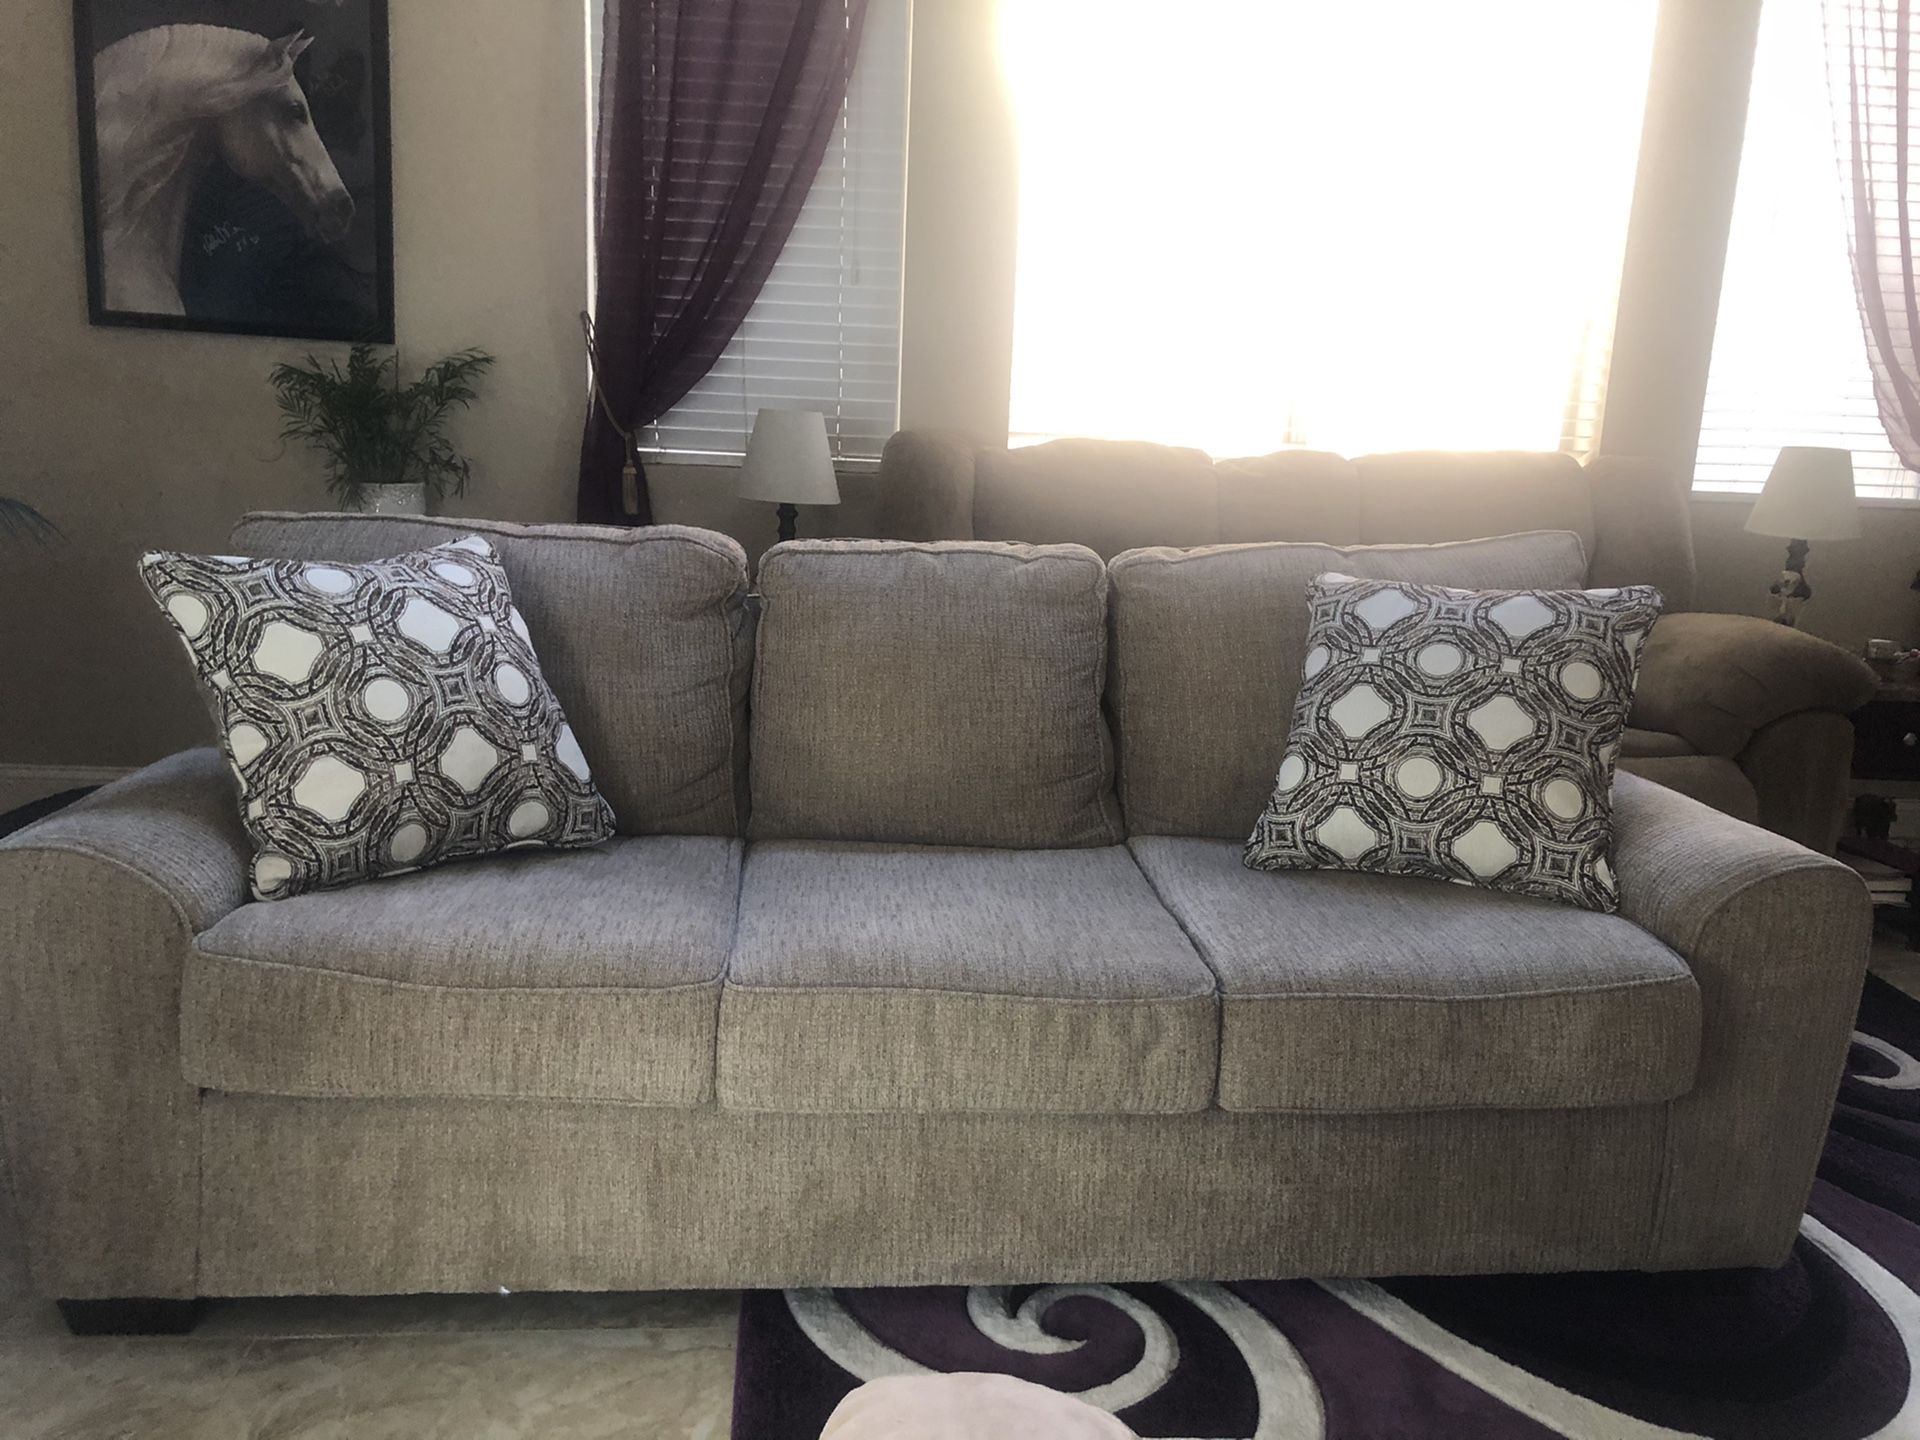 Like new couch!